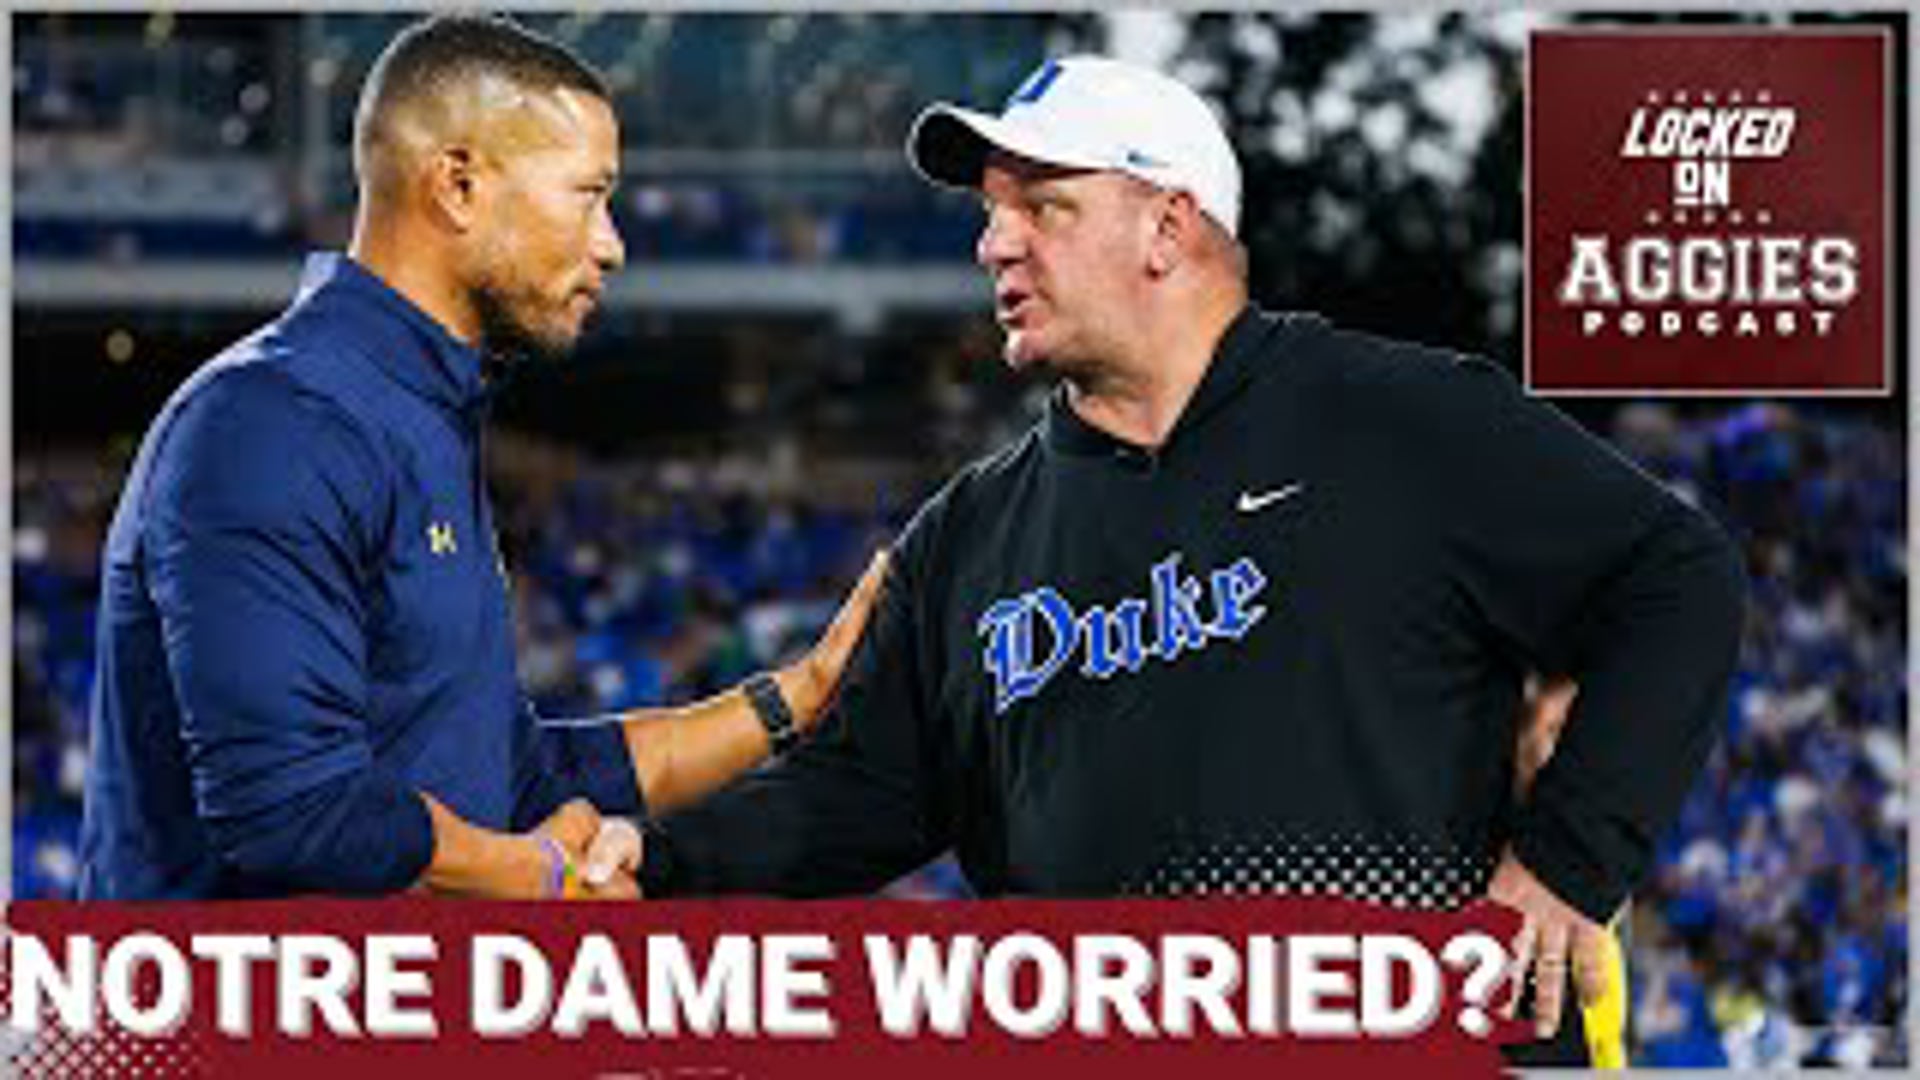 On today's episode of Locked On Aggies, host Andrew Stefaniak talks about an article from Notre Dame's Fan Nation site that talks about a few things to know about.